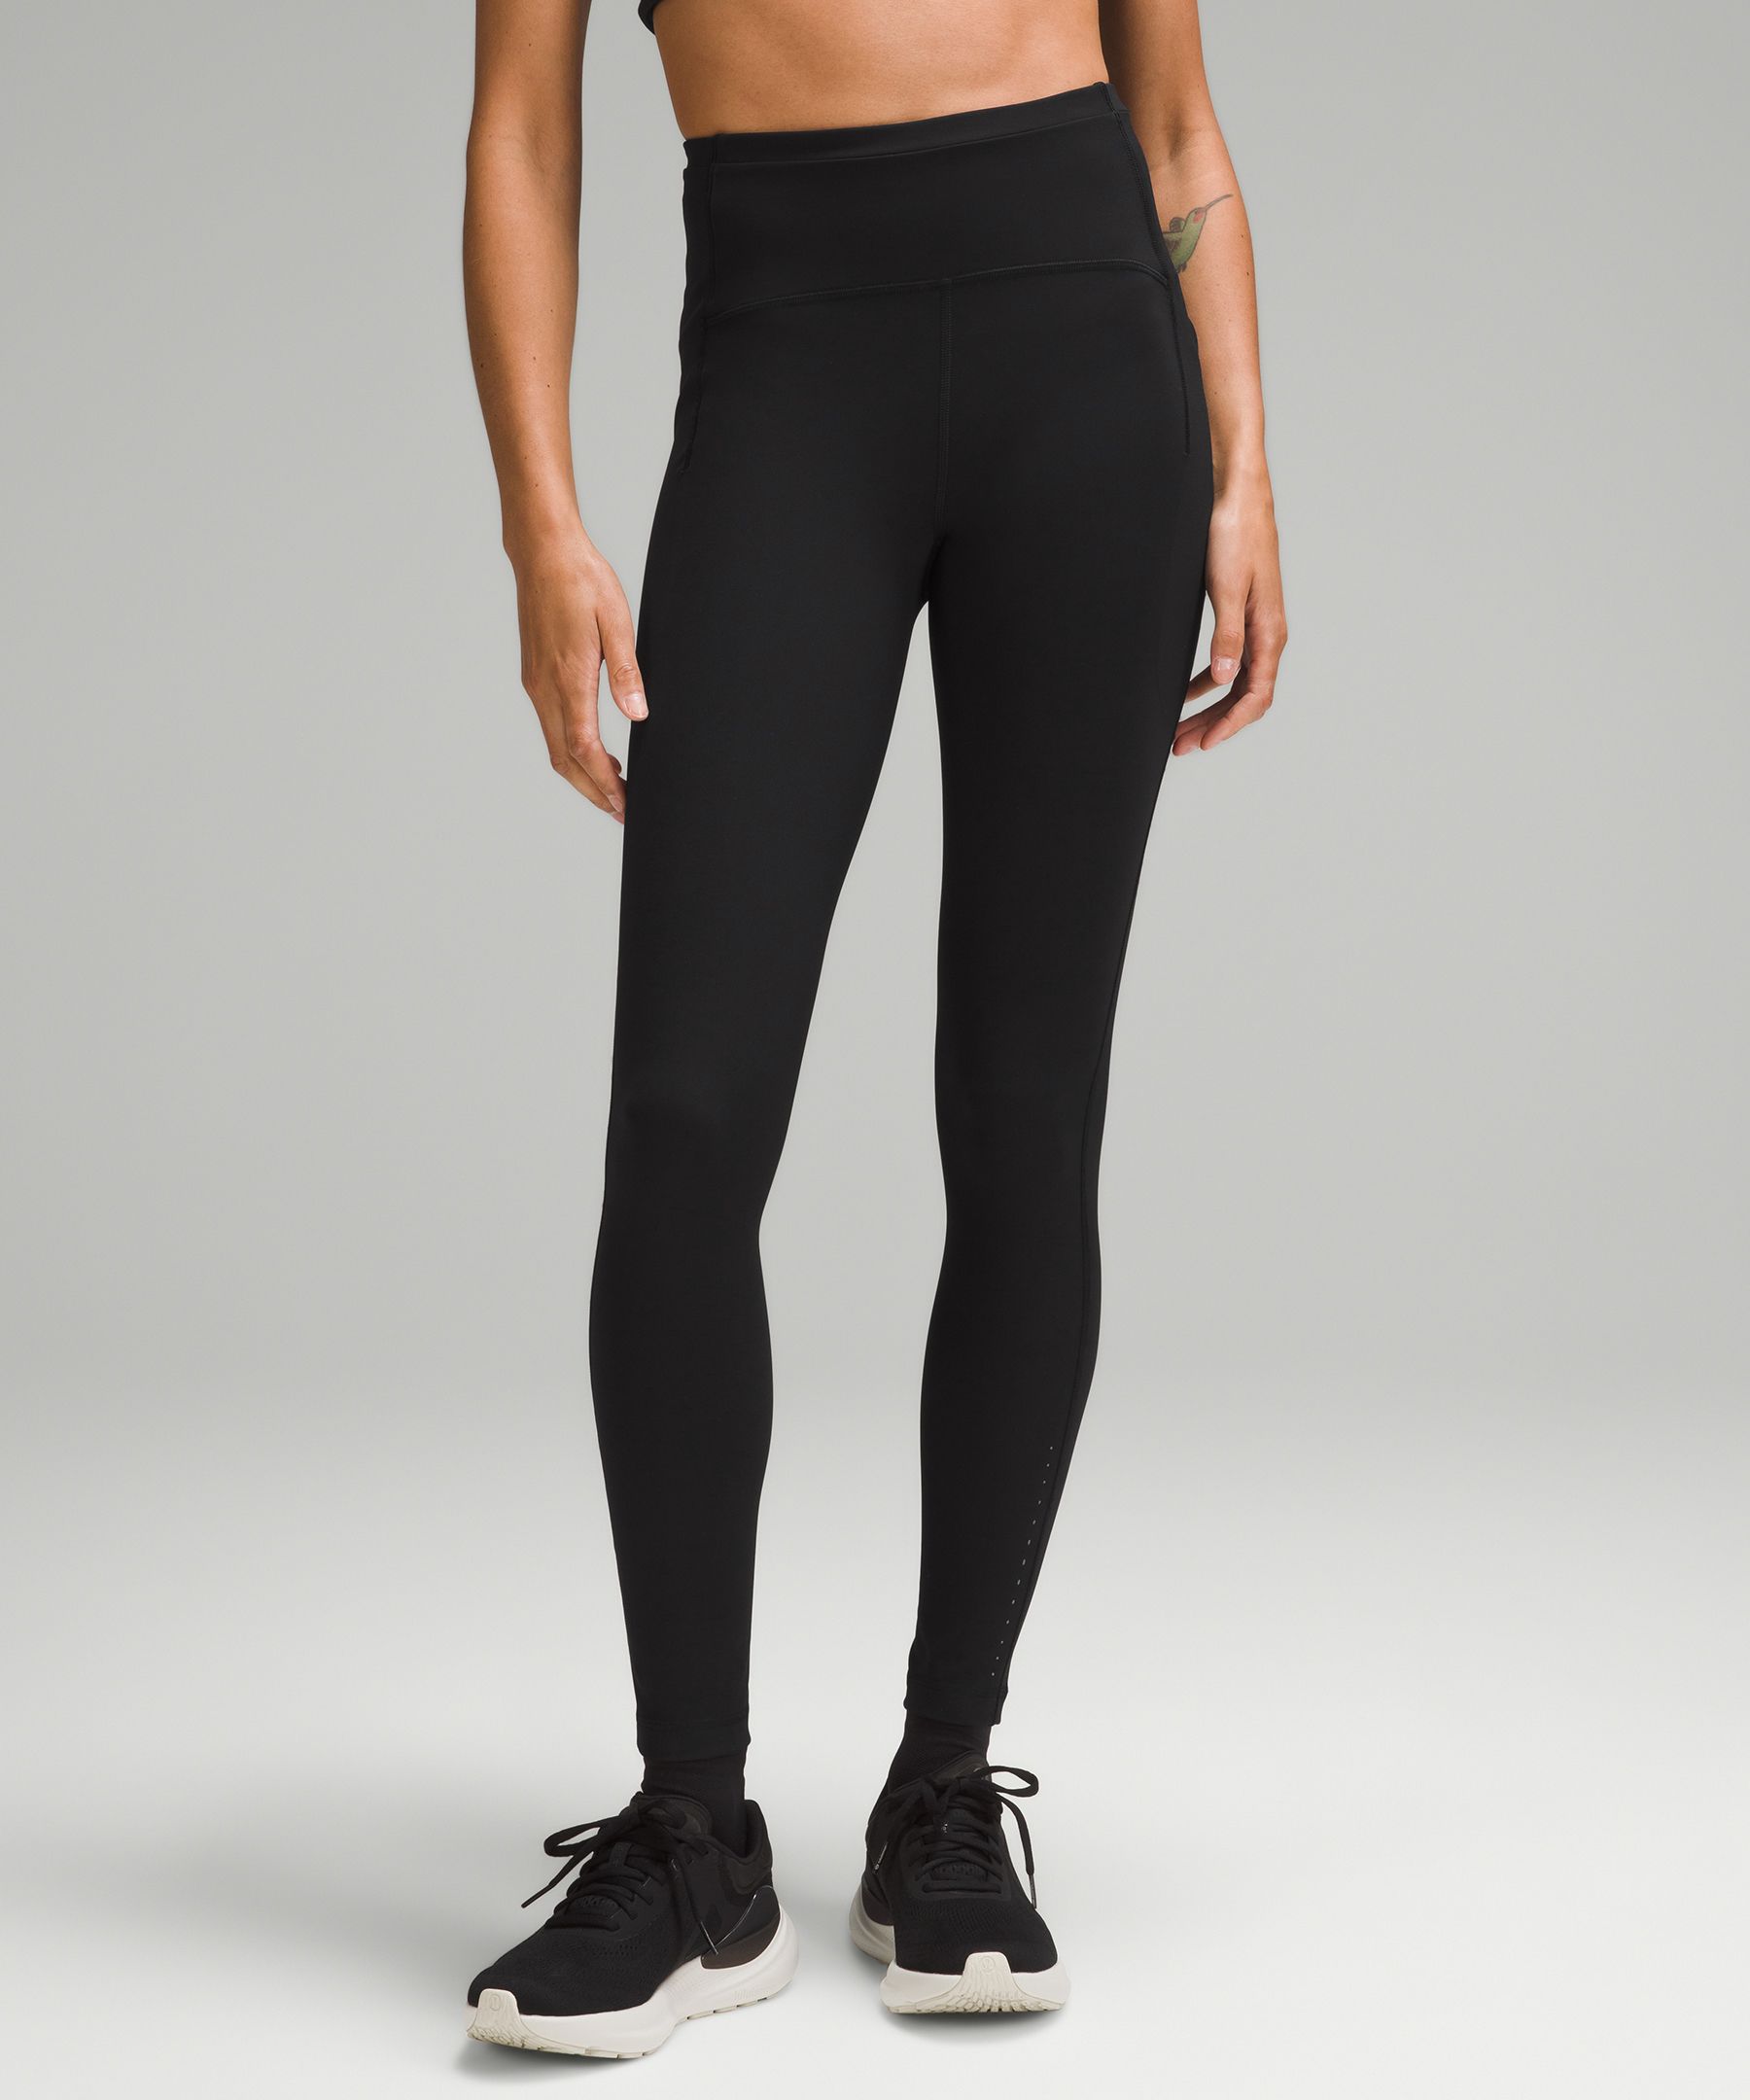 Swift Speed High-Rise Tight 28 *Brushed Luxtreme